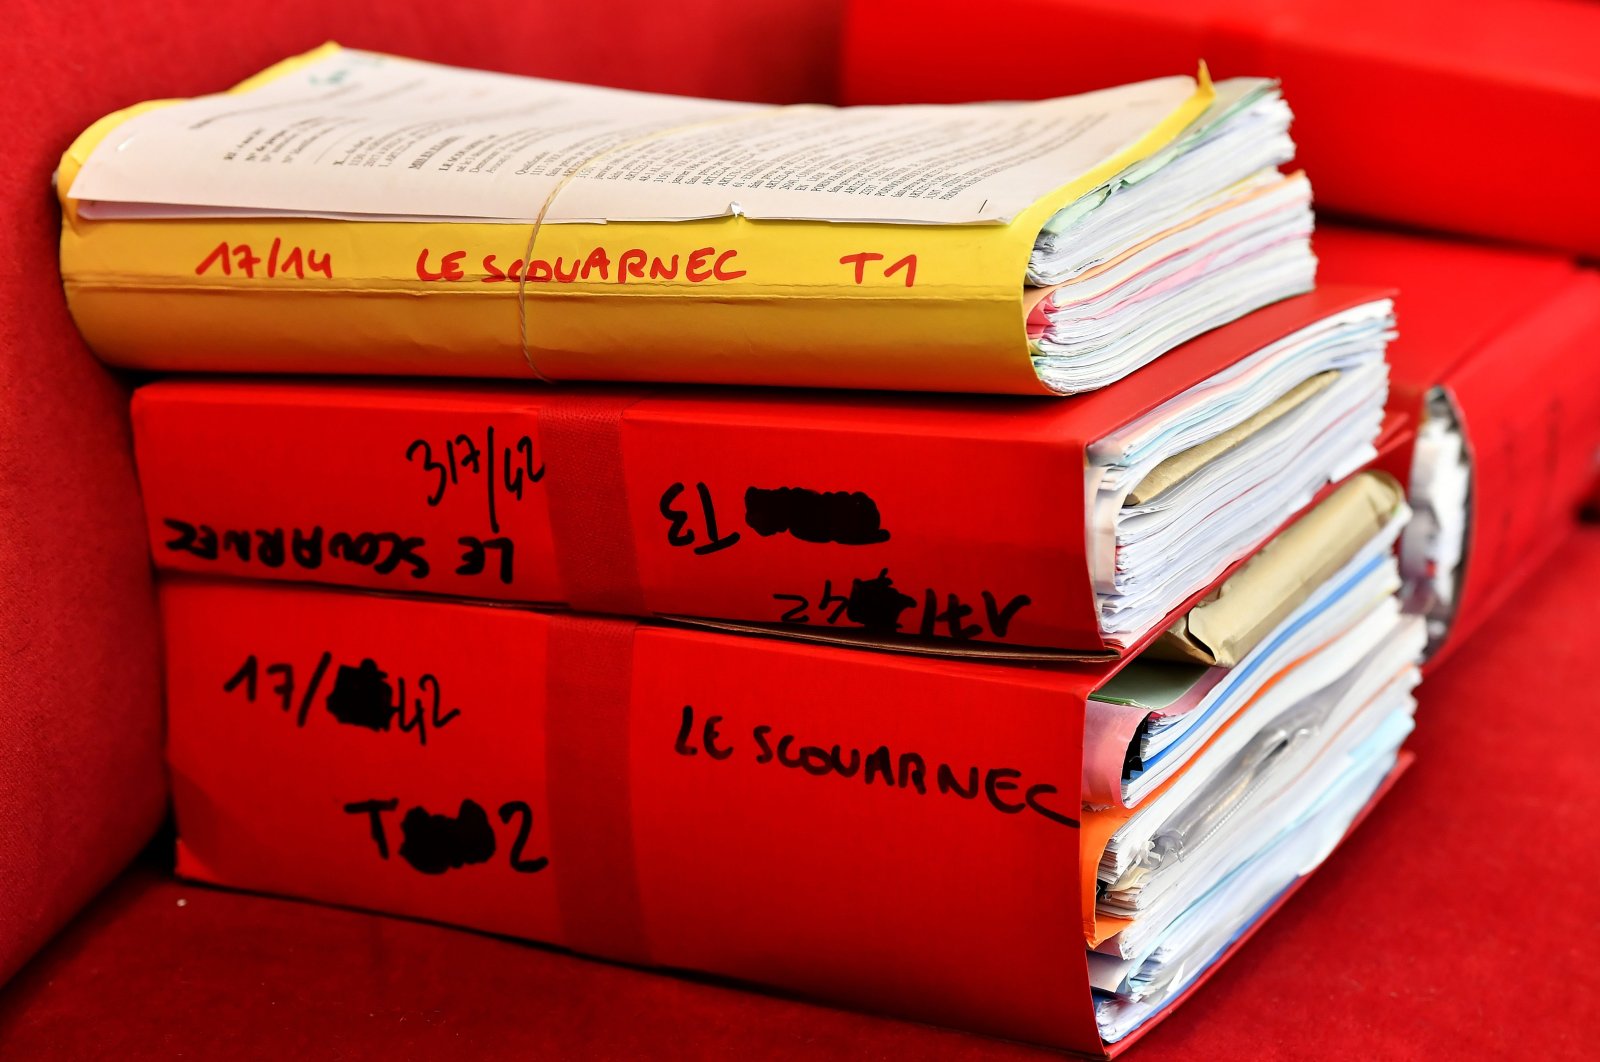 Files are displayed in the courtroom during the opening day of a French surgeon's trial for the rape and sexual abuse of four children, Saintes, March 13, 2020. (AFP Photo)